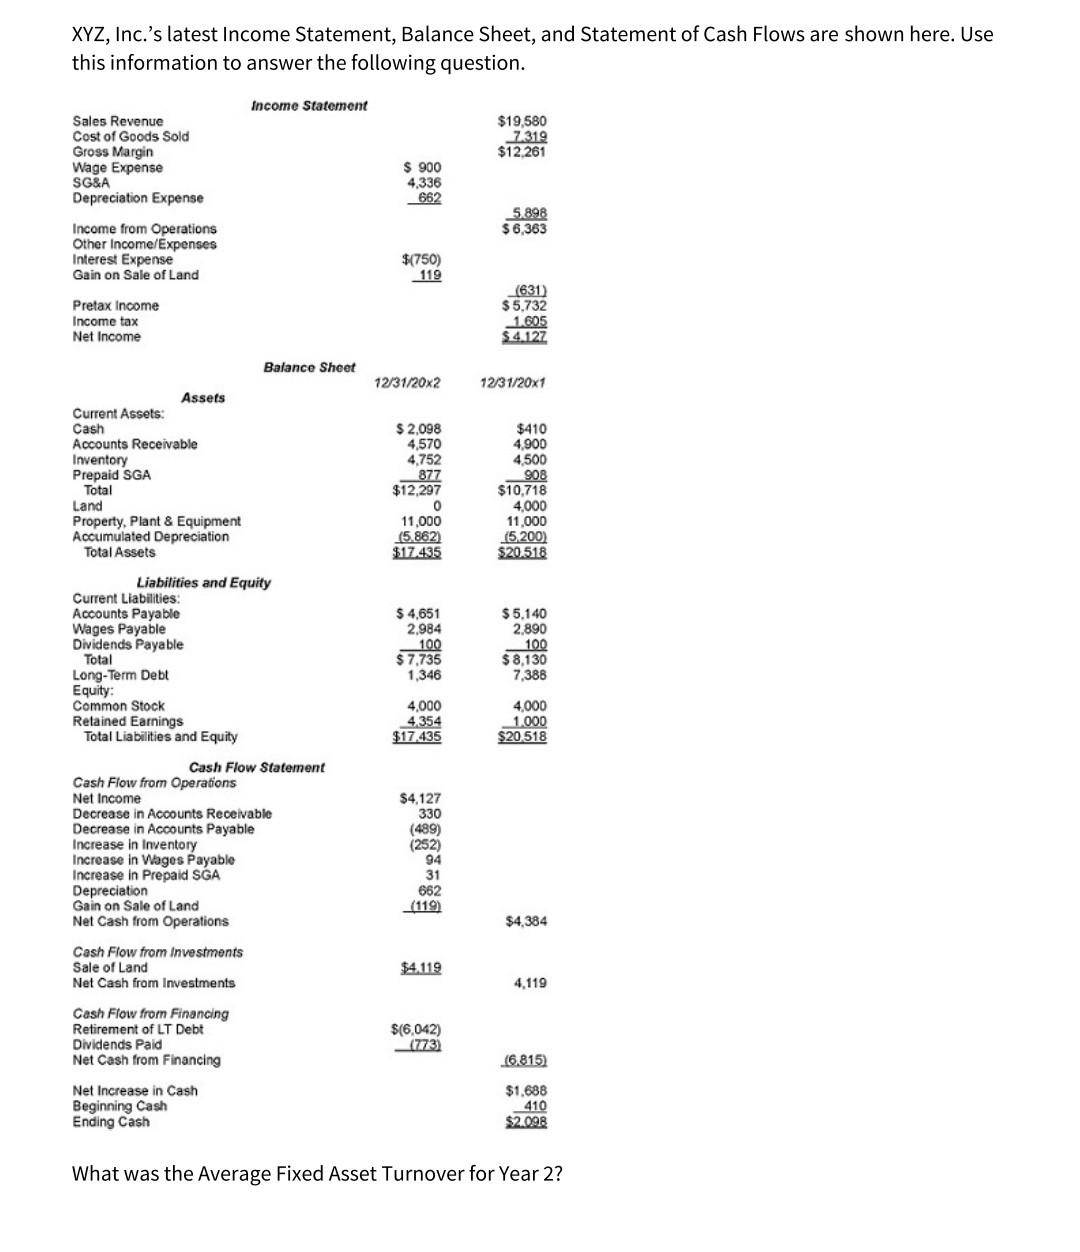 XYZ, Inc.s latest Income Statement, Balance Sheet, and Statement of Cash Flows are shown here. Usethis information to answe